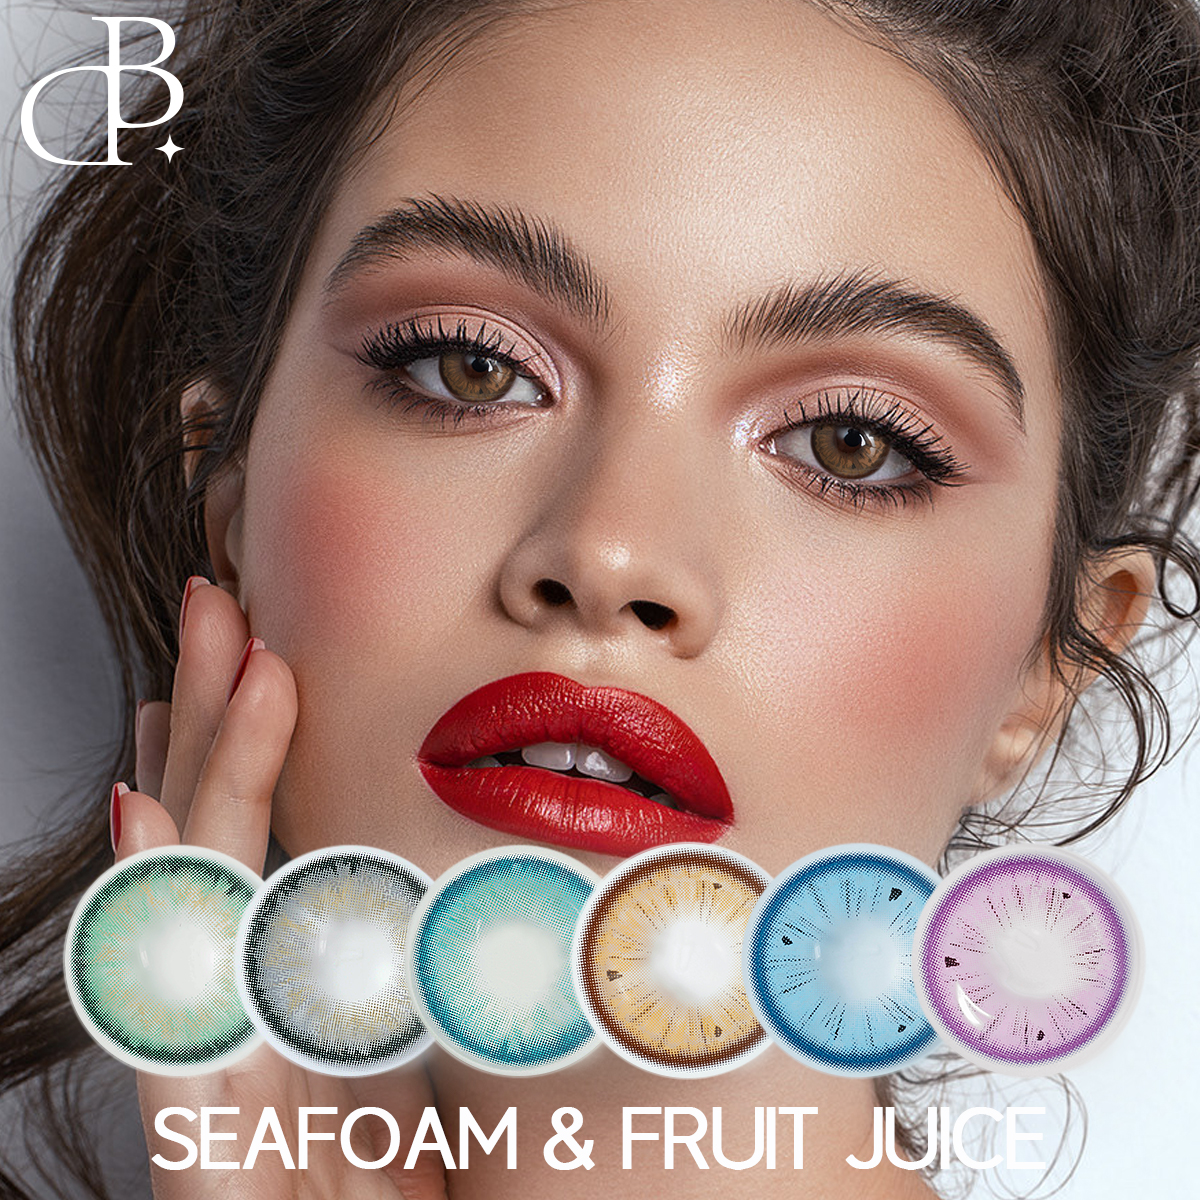 https://www.dblenses.com/seafoamfruit-juice-oemodm-contacto-new-style-natural-eyes-colour-lens-cosmetic-eyes-lens-color-contacts-lenses-product/